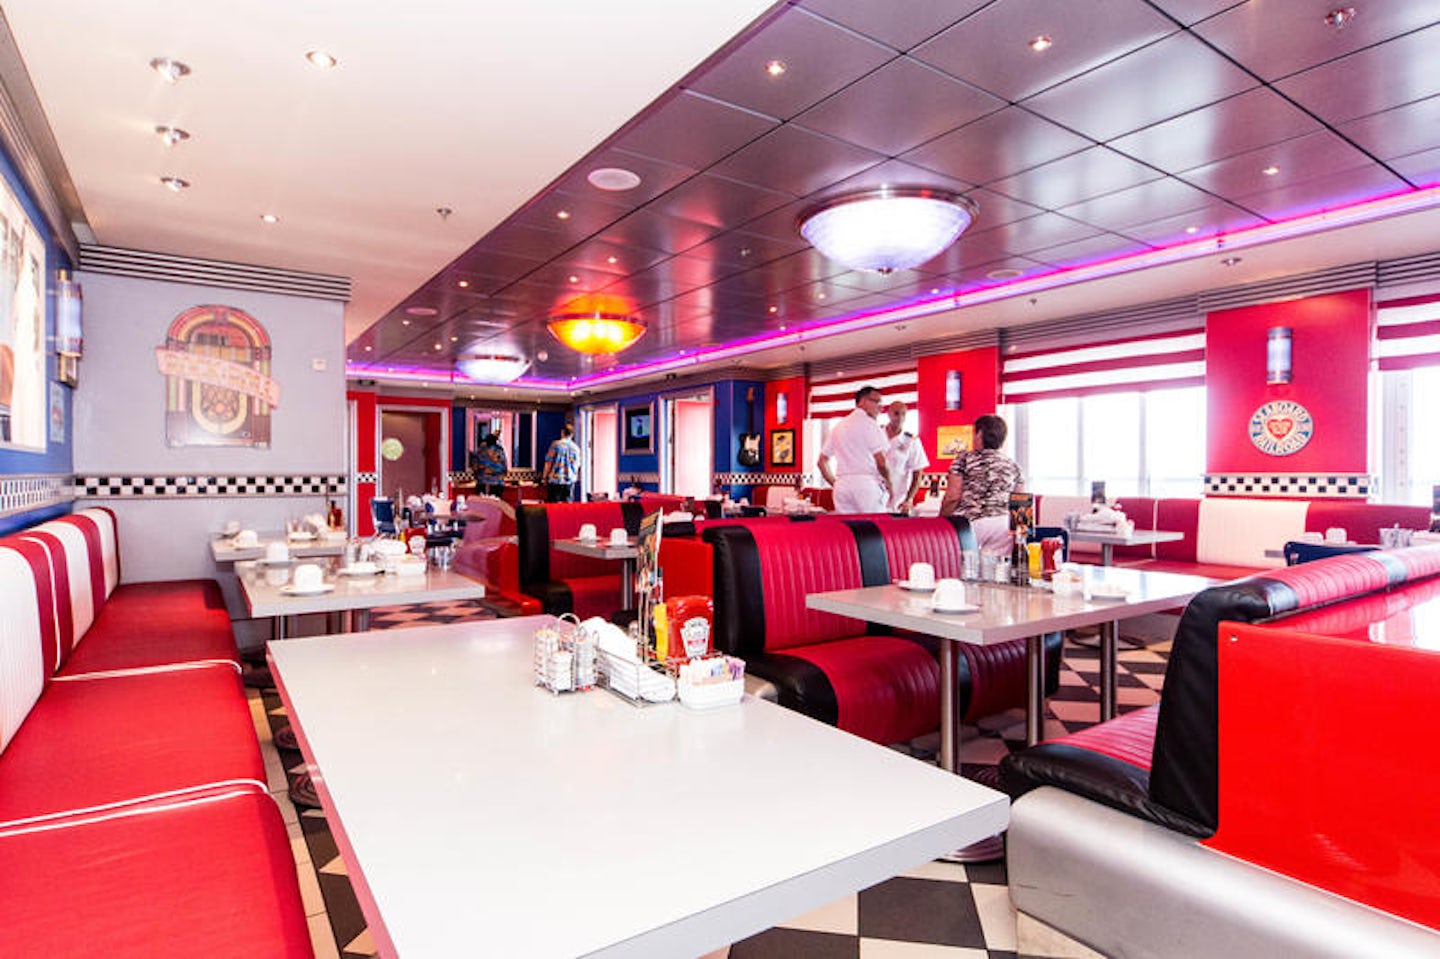 Cadillac Diner on Pride of America